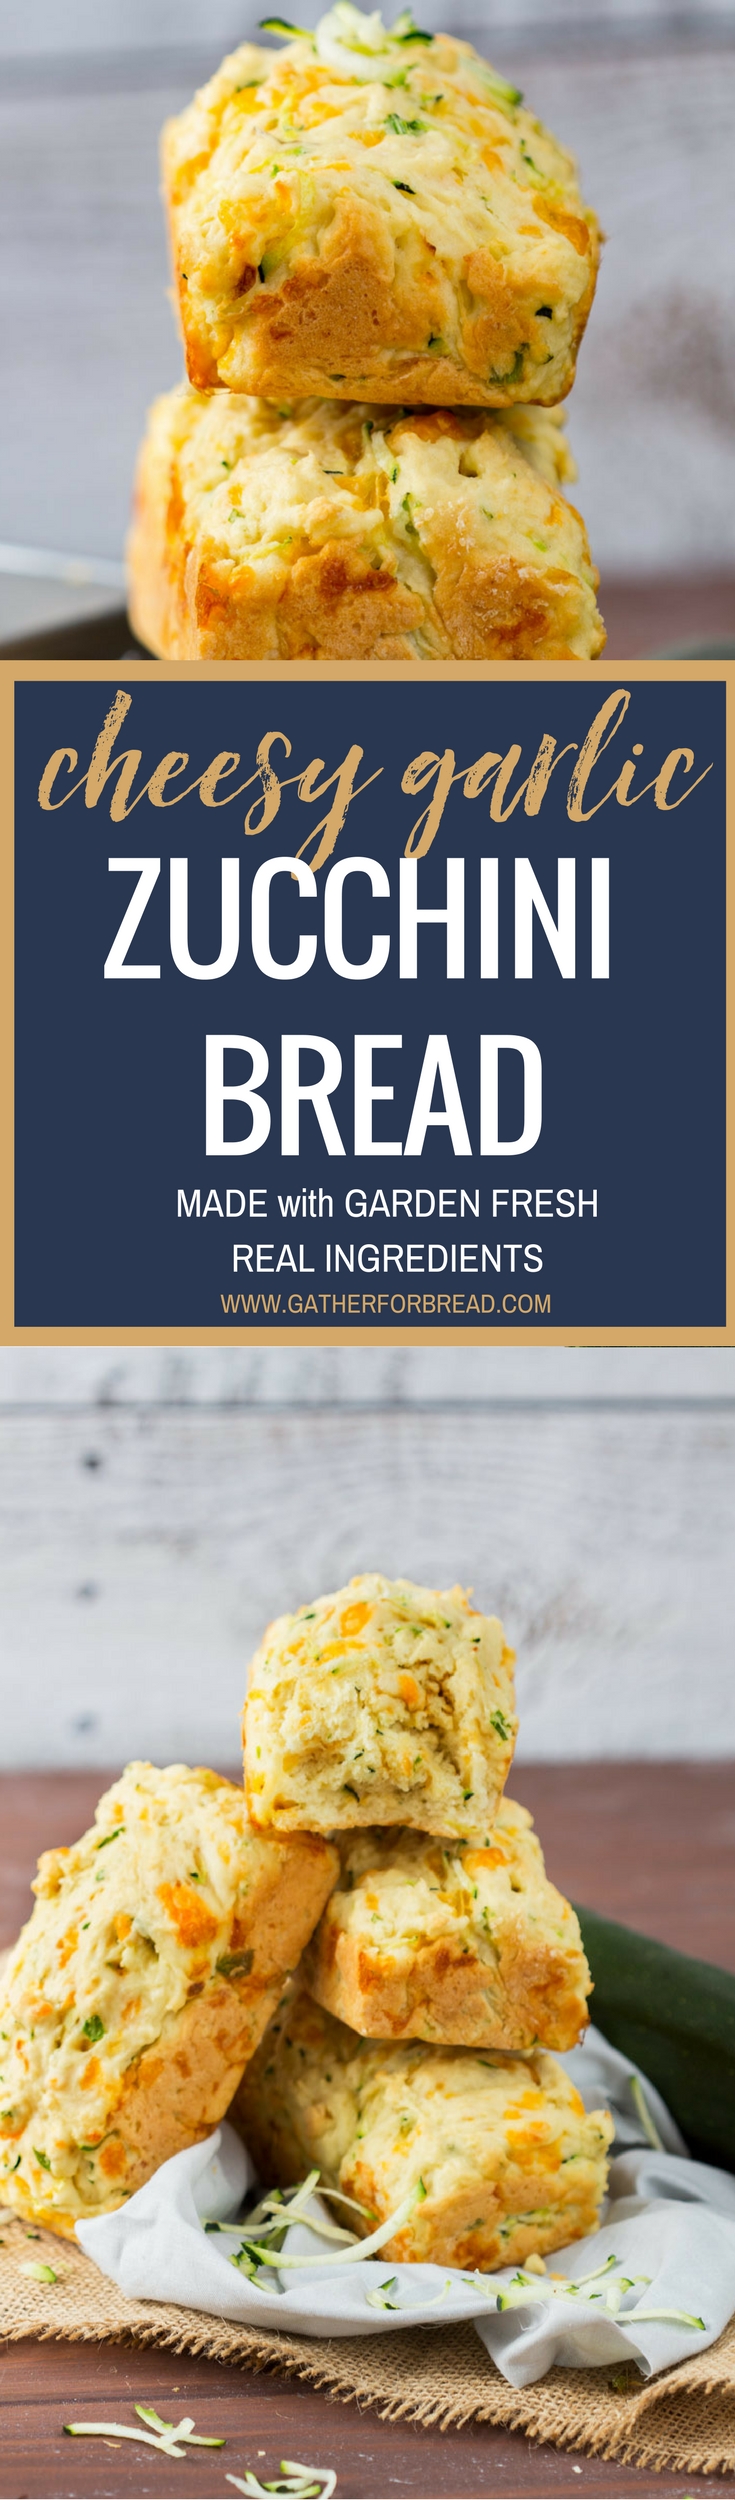 Cheesy Garlic Zucchini Bread - Delicious homemade fresh zucchini bread with cheddar cheese and garlic. Easy tasty recipe is the perfect summer appetizer or side to every meal.